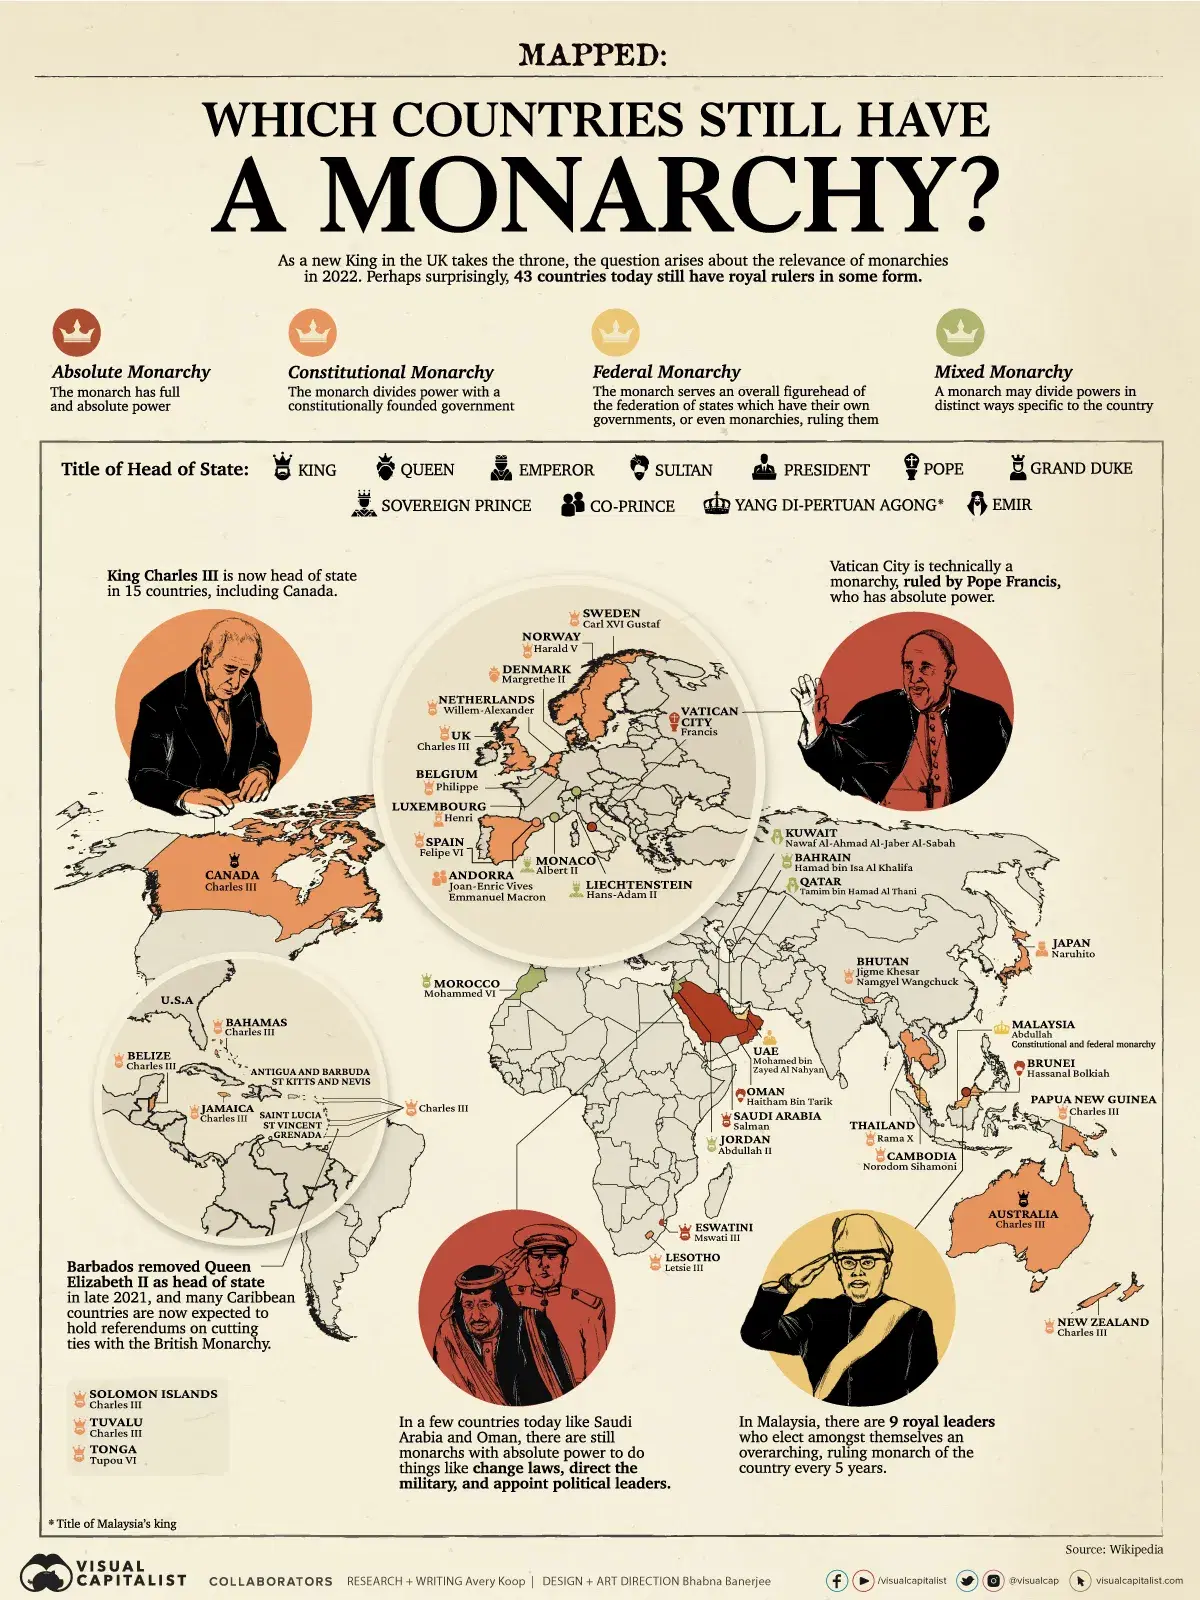 Which Countries Still Have a Monarchy?